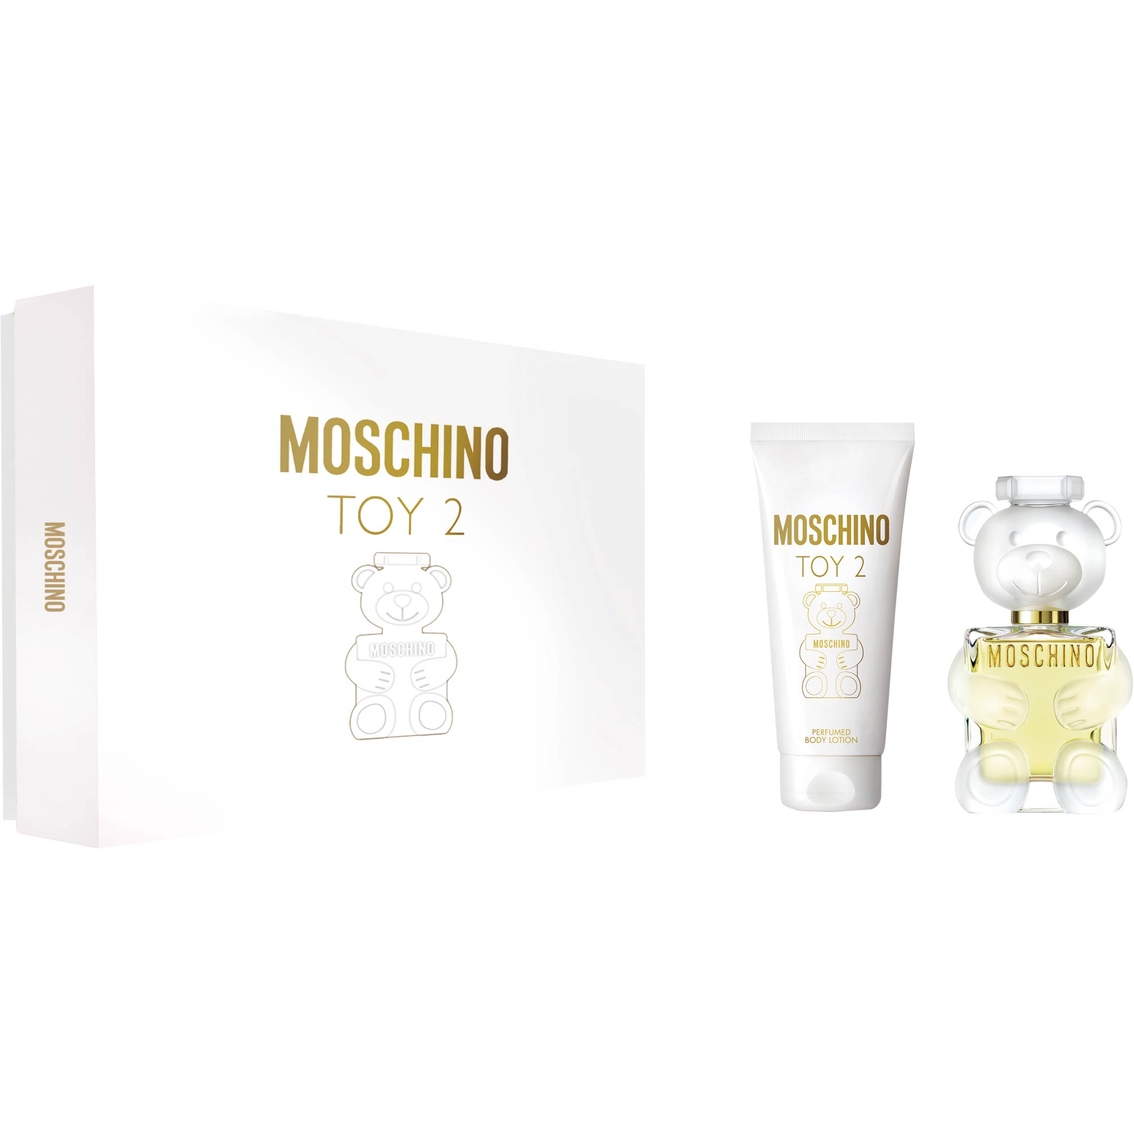 Moschino Toy 2 Gift Set | Gifts Sets 